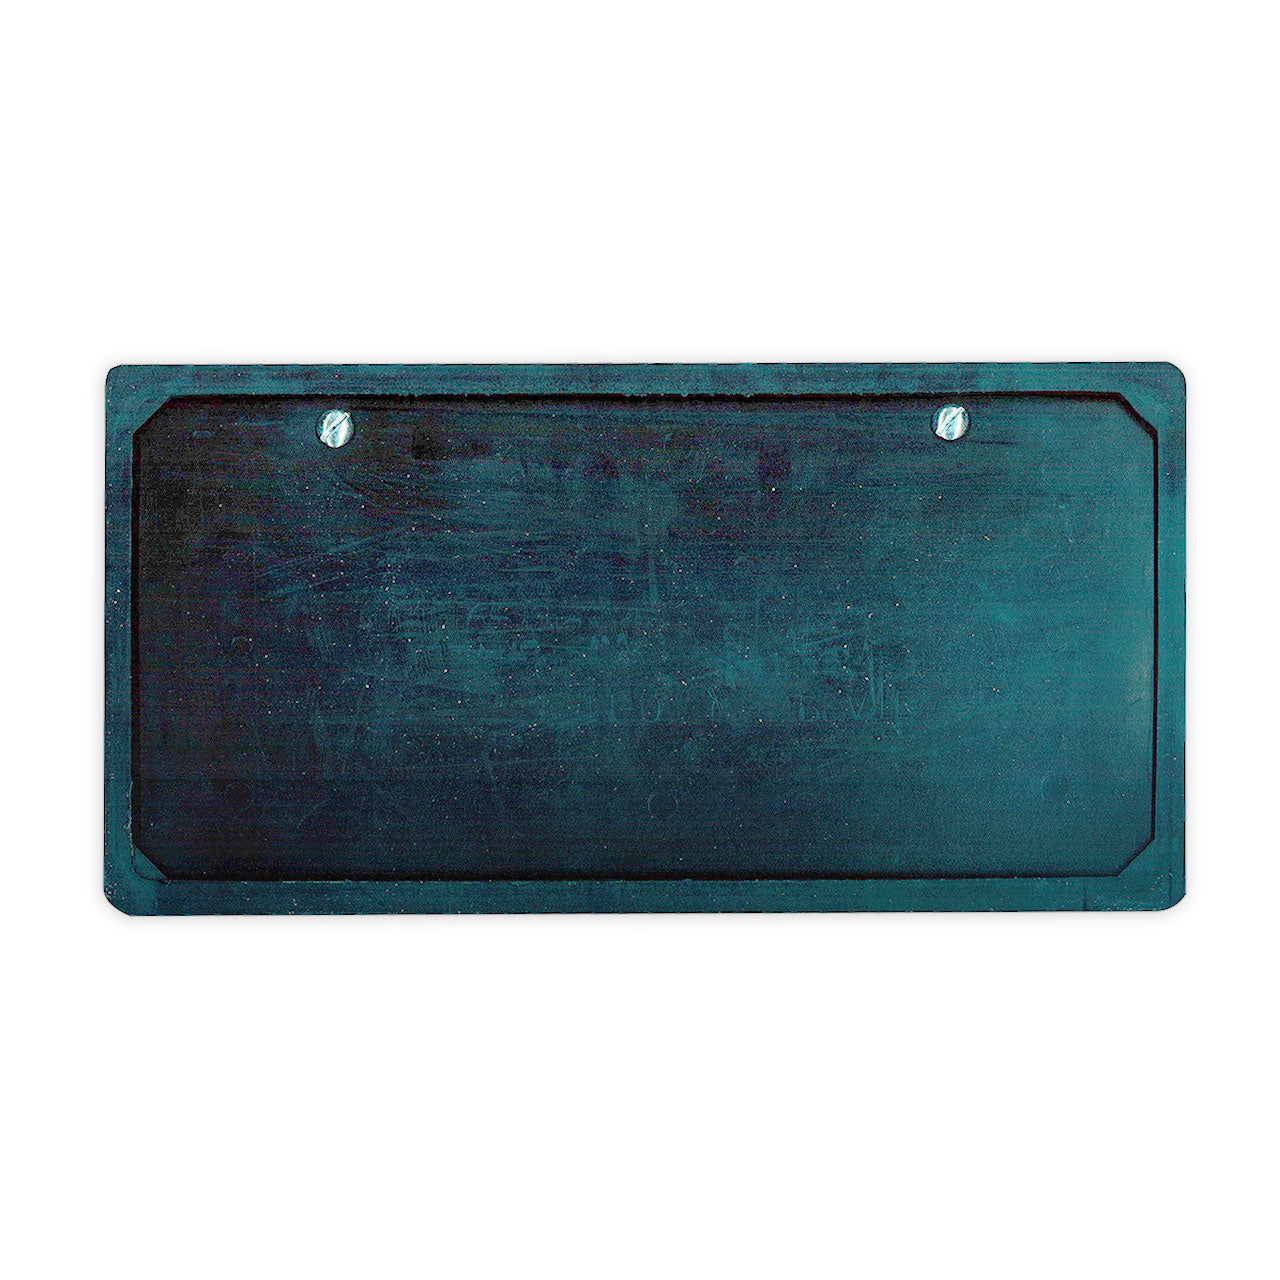 Jiffy Magnetic Rubber License Plate Protector